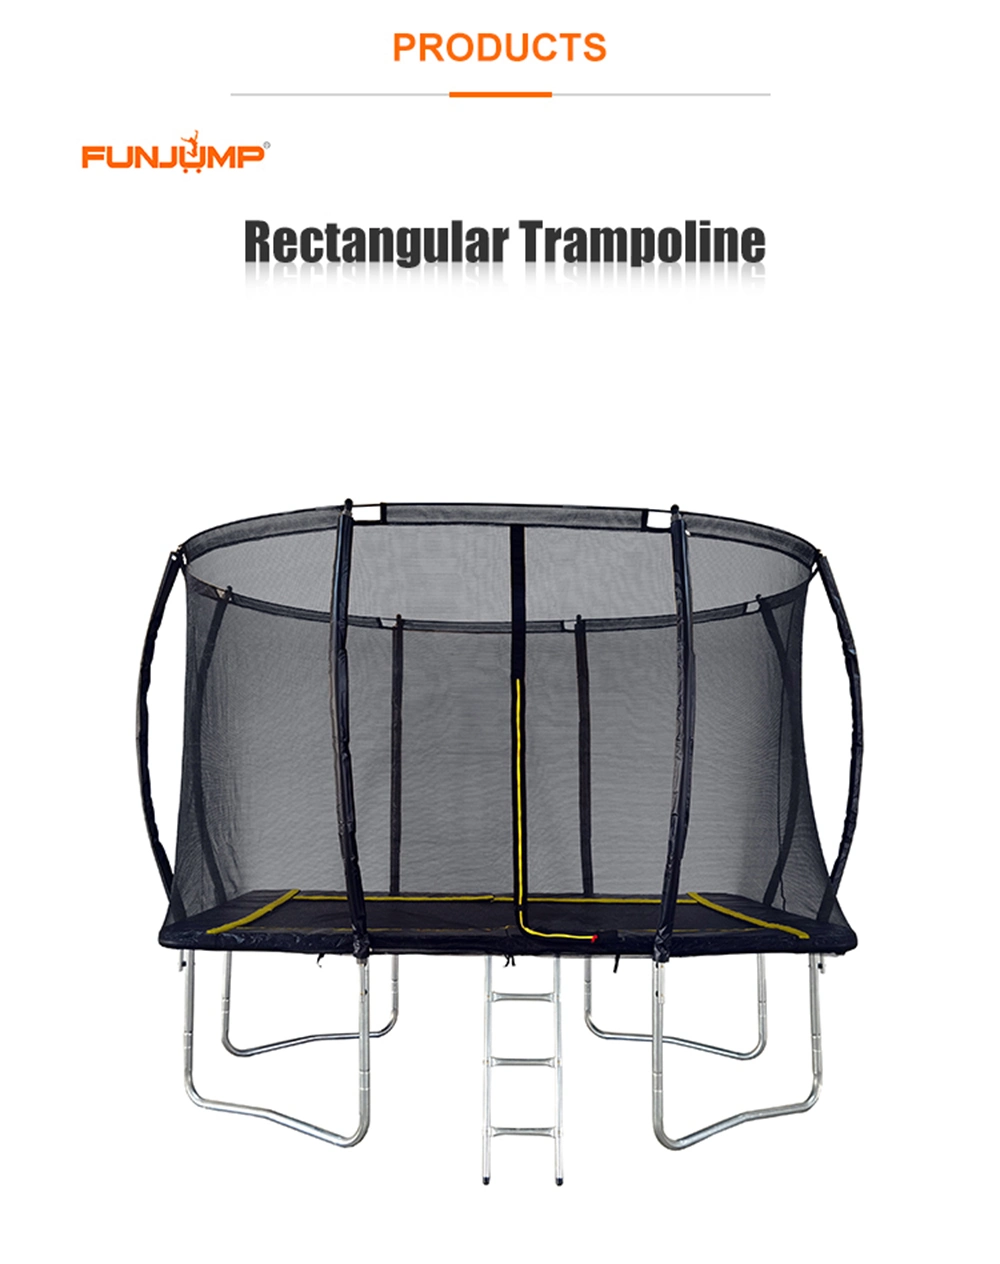 Funjump Good Elasticity Outdoor Large Rectangular Trampoline with Safety Net